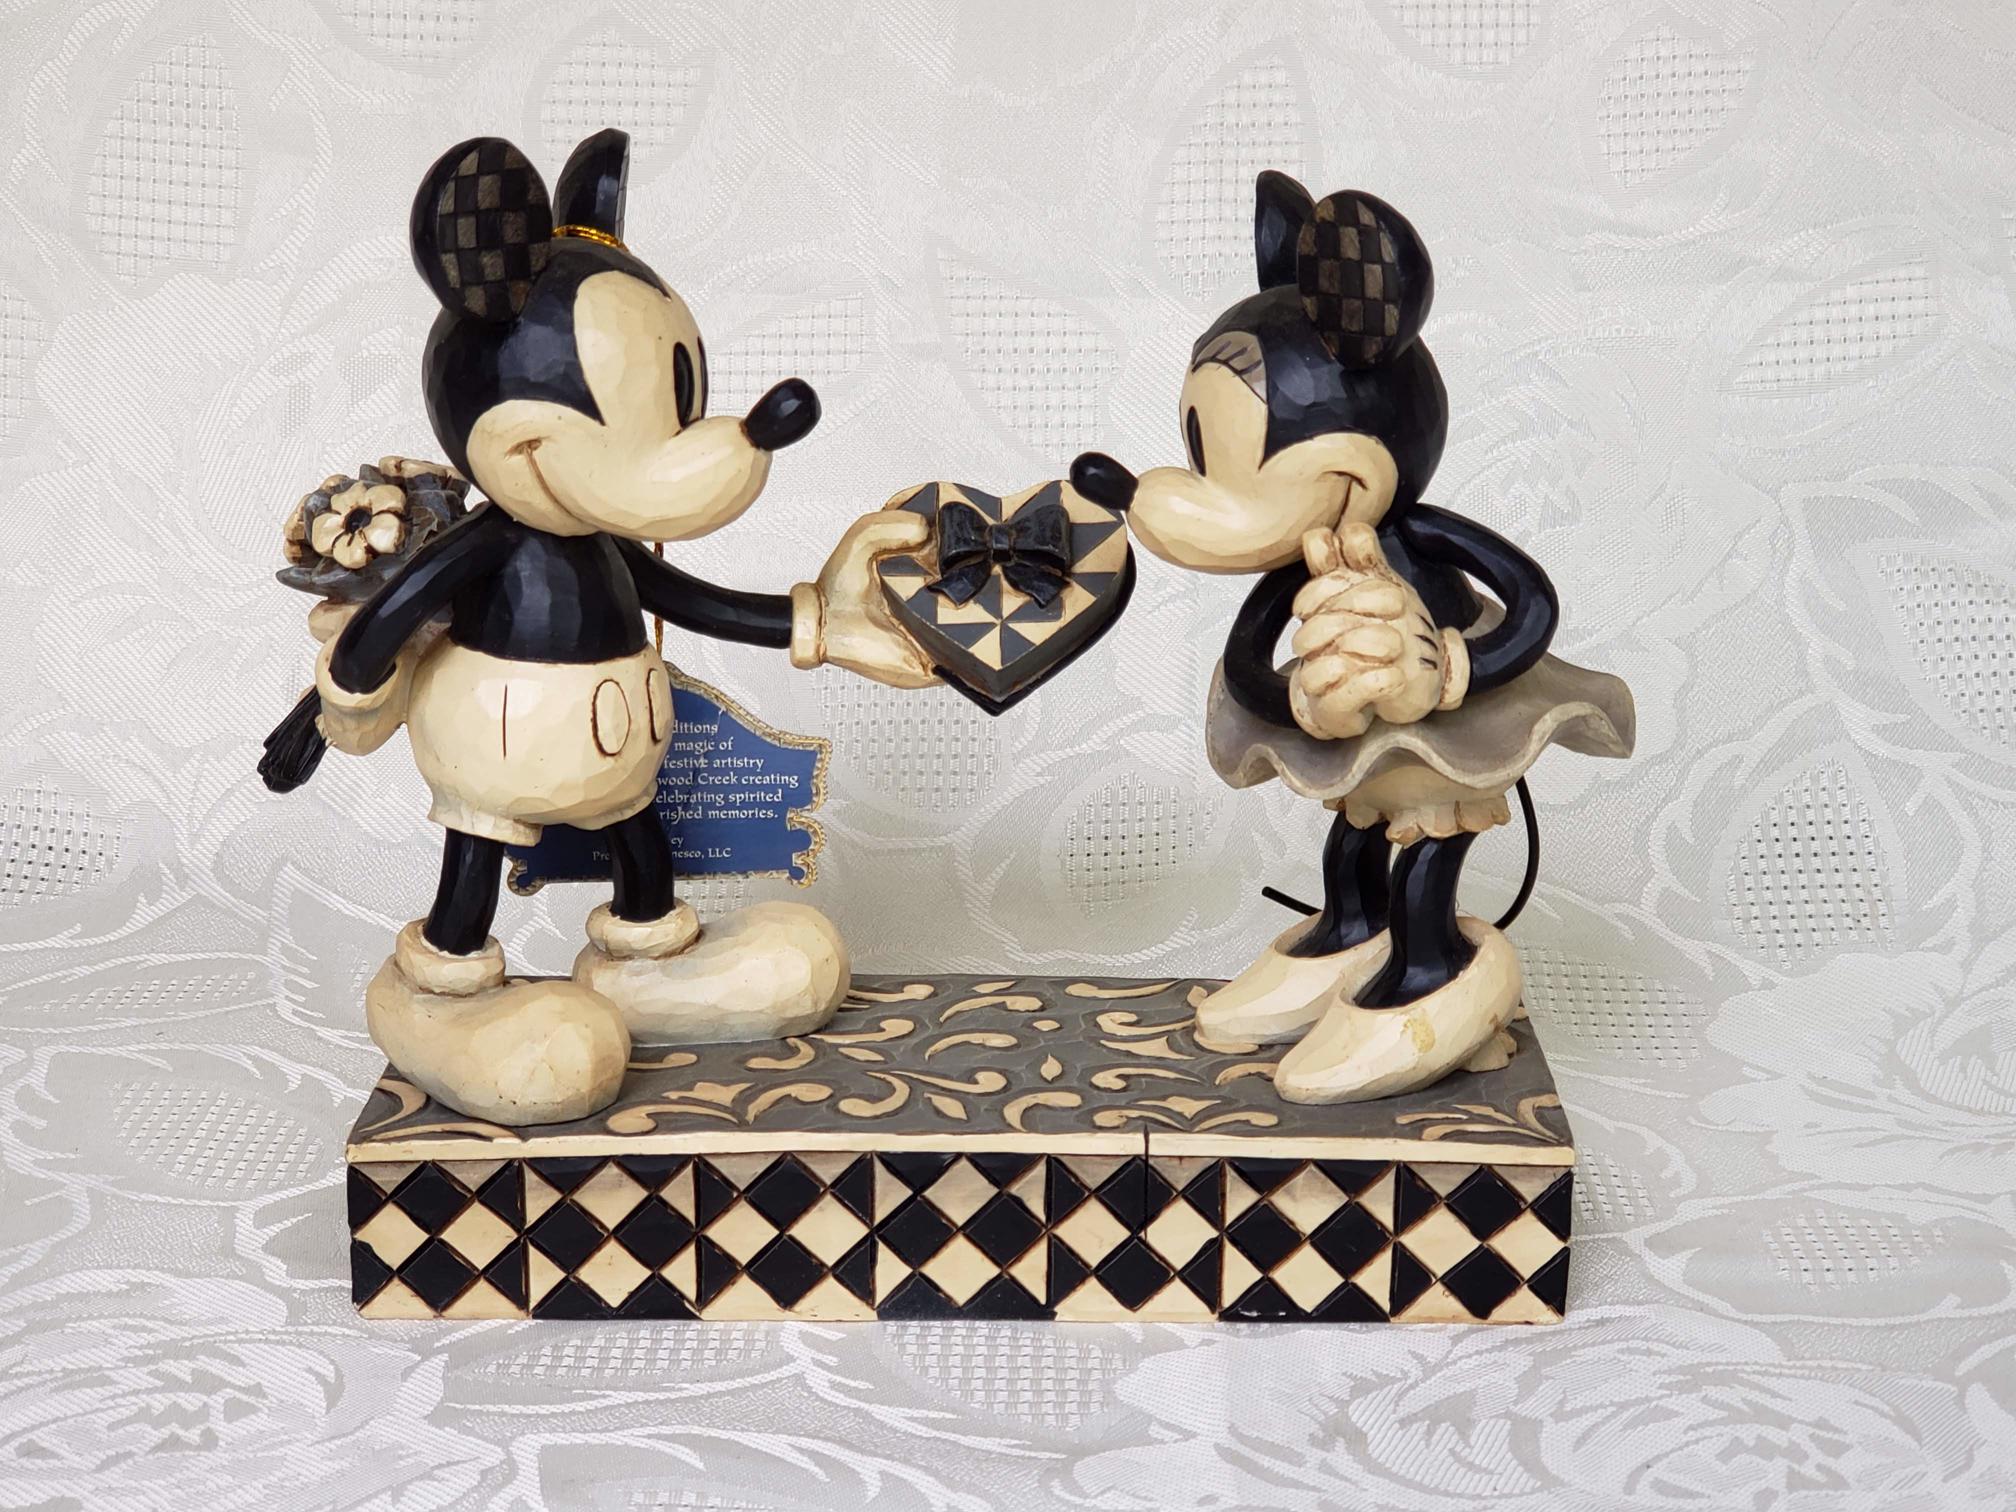 Jim Shore Disney Traditions Mickey Minnie Mouse Real Sweetheart Figurine